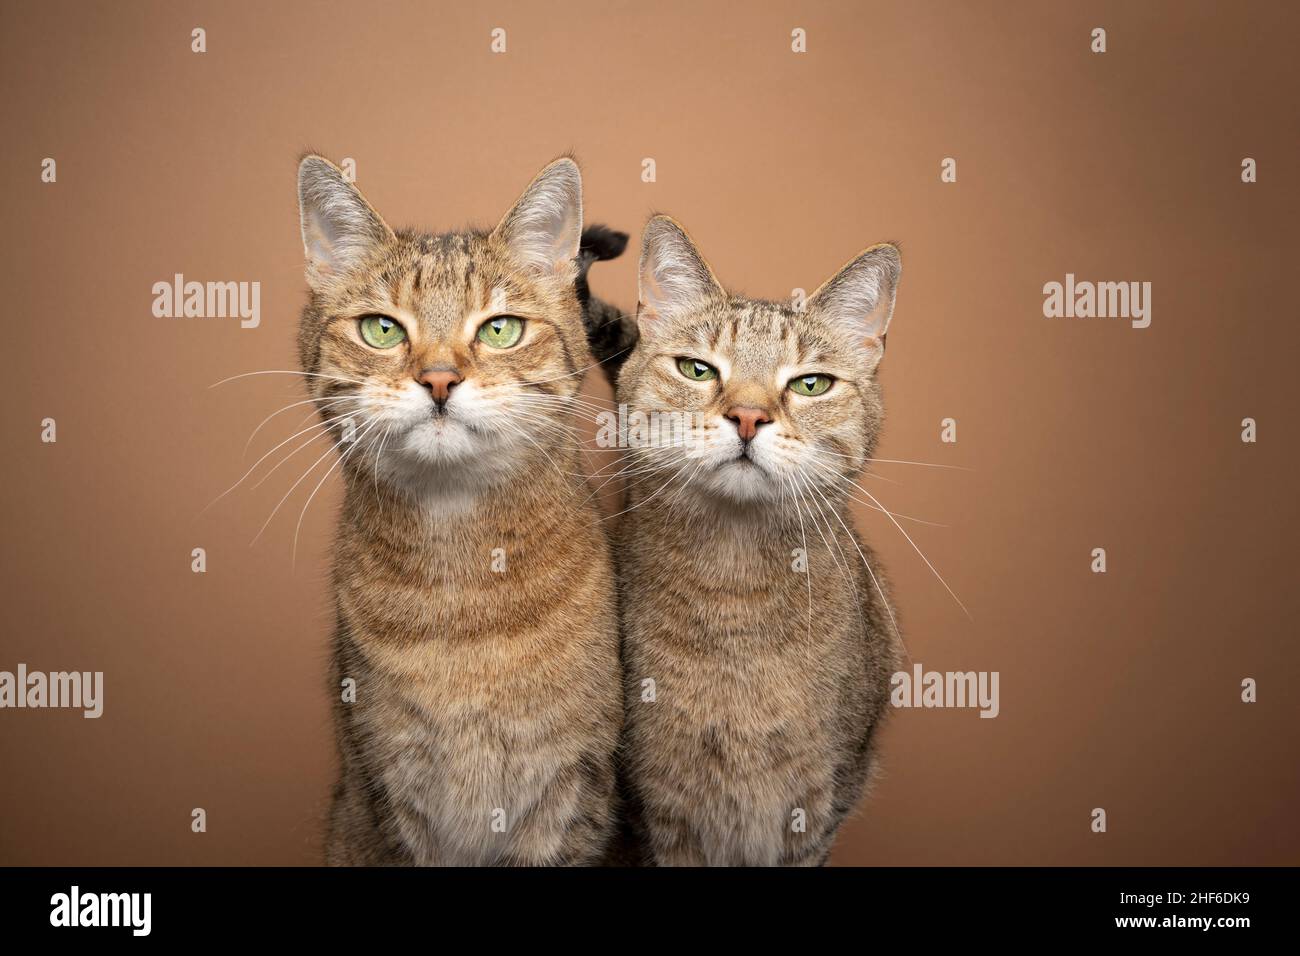 two brown tabby cat siblings standing side by side looking at camera tone on tone portrait on brown background with copy space Stock Photo